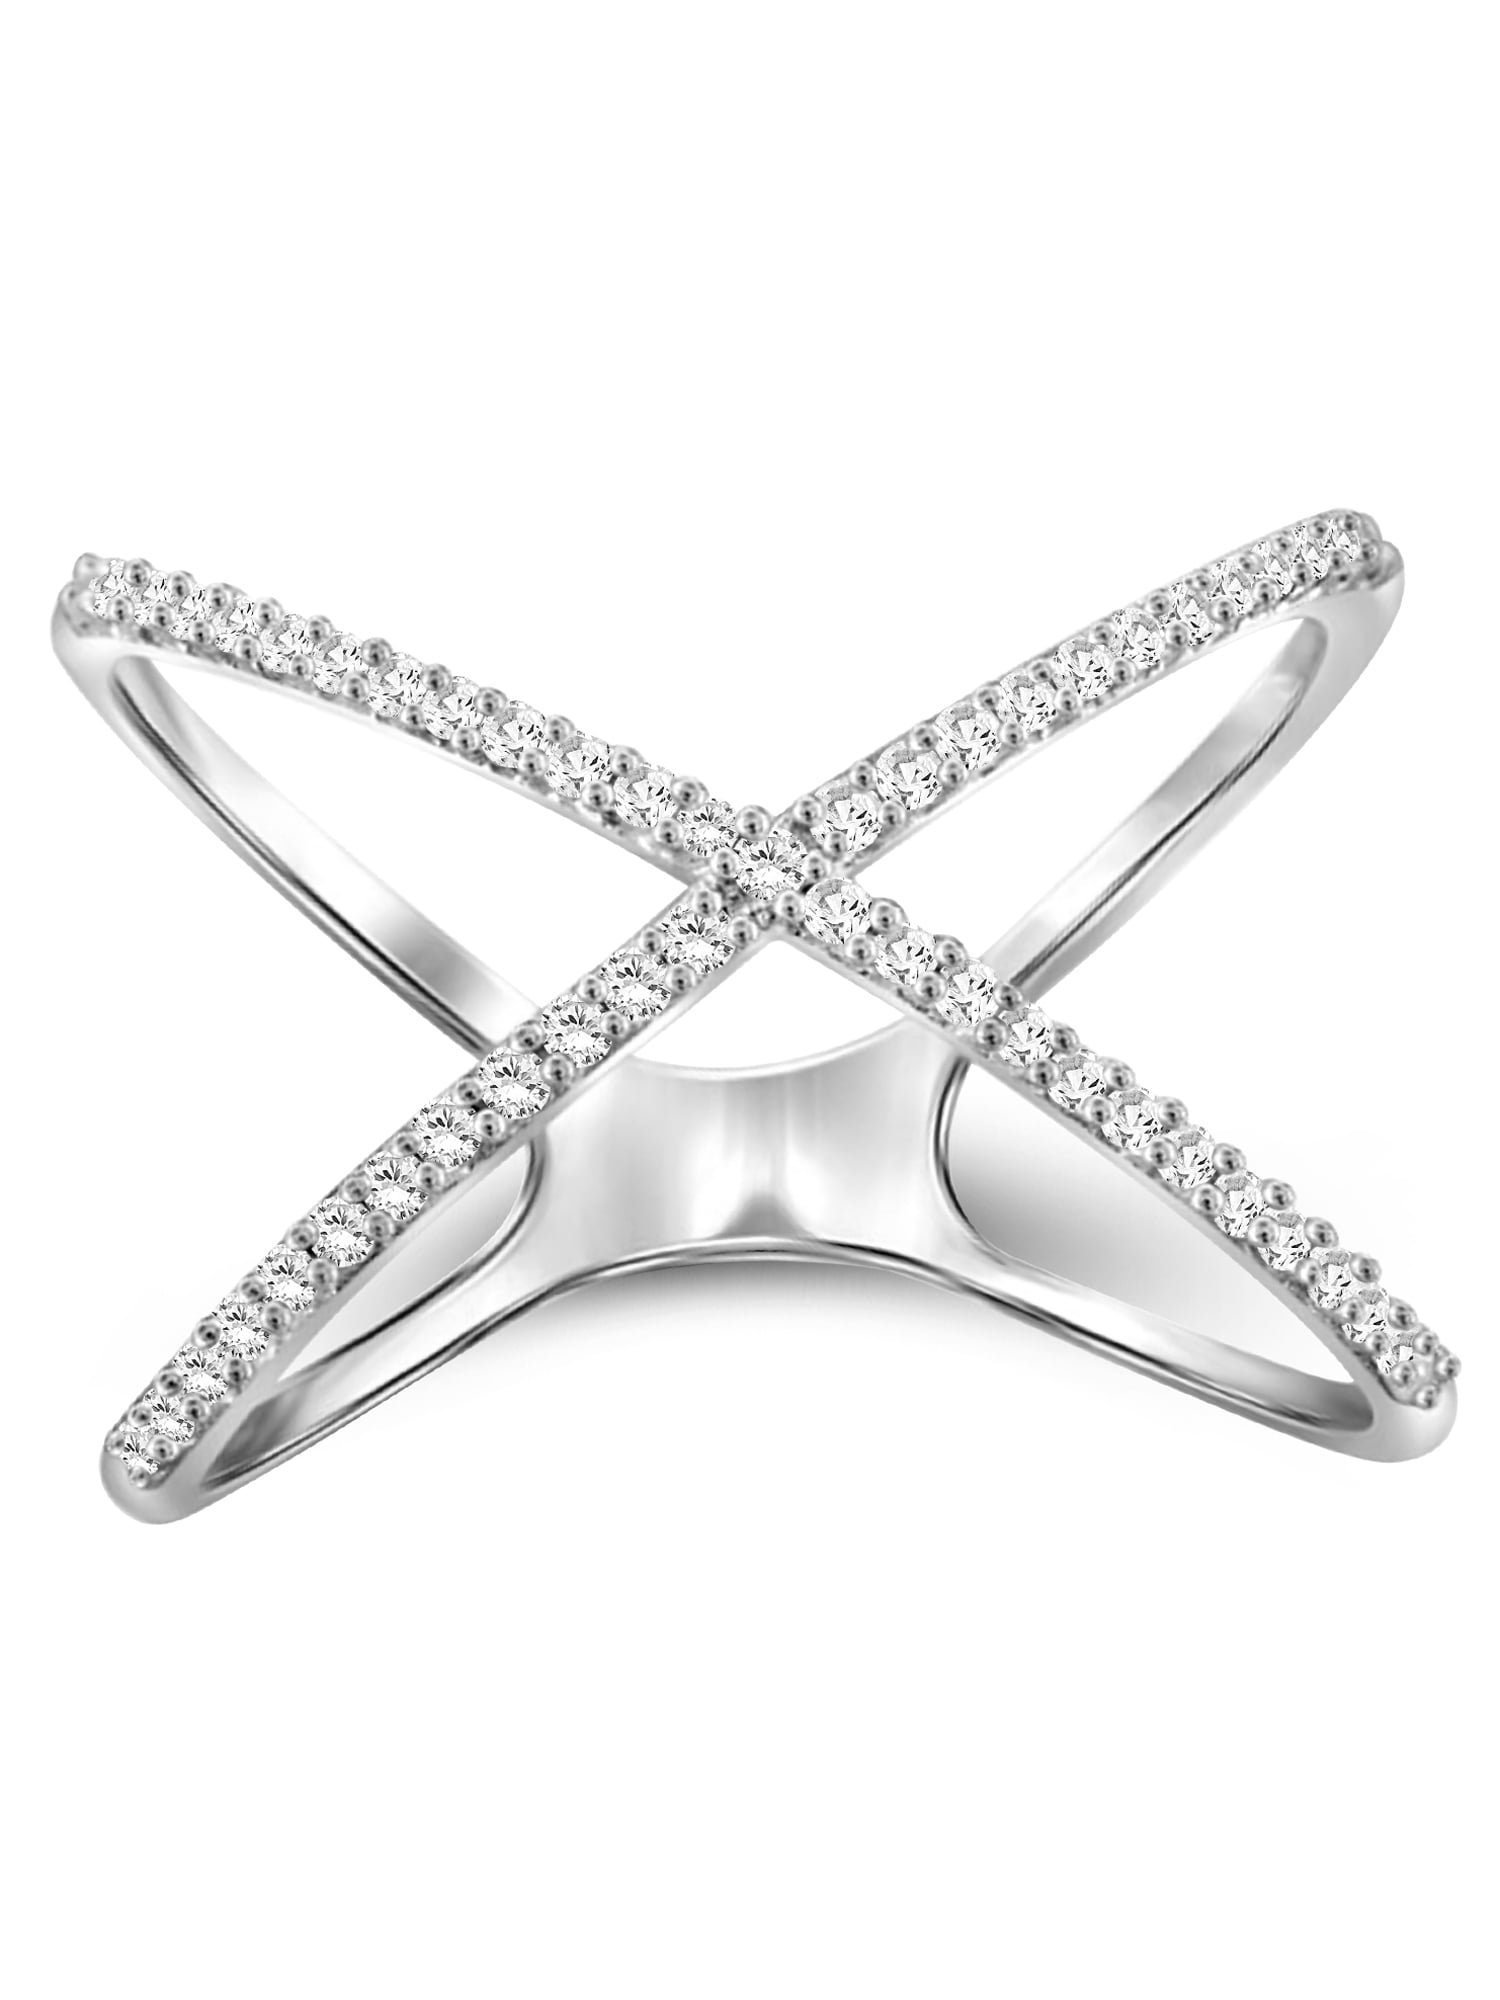 JewelersClub 0.925 Sterling Silver Criss Cross Ring – 1/4 Carat White  Diamond Ring with 0.925 Sterling Silver X Ring – Real Diamond Criss Cross  Ring with Hypoallergenic 0.925 Sterling Silver Ring - Walmart.com